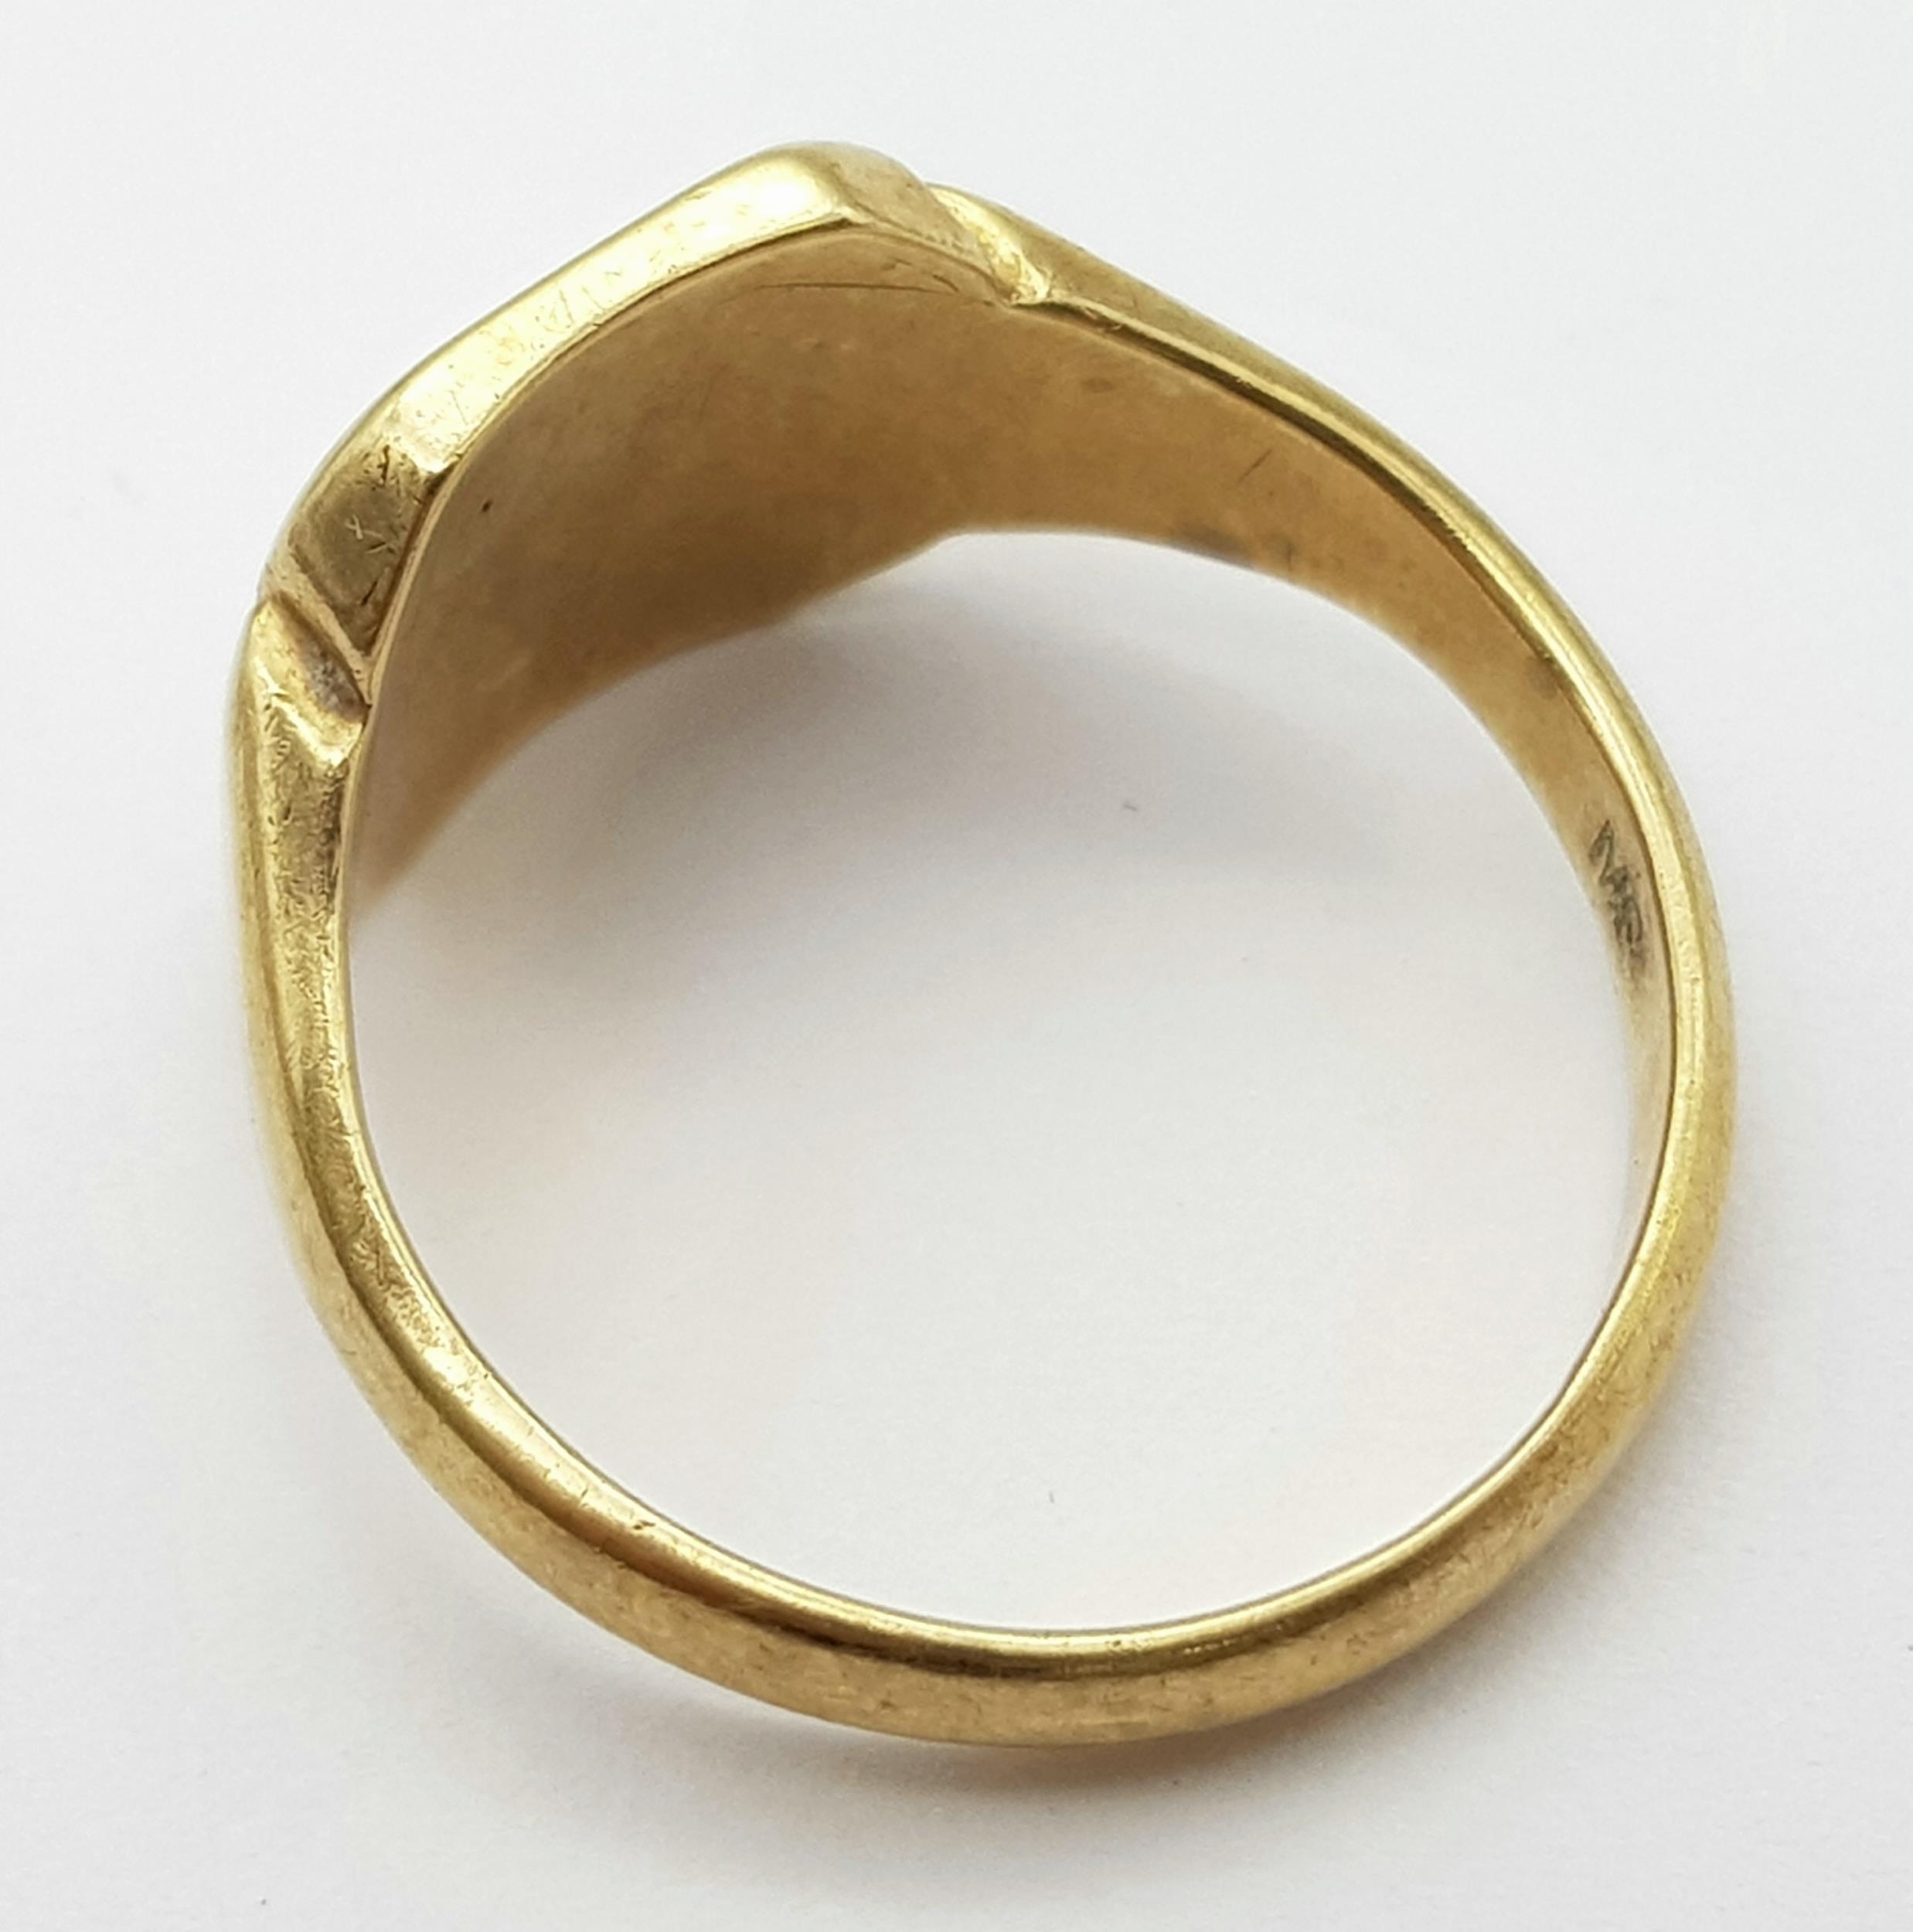 A Vintage 9K Yellow Gold Gents Signet Ring. Size V. 7.8g - Image 3 of 4